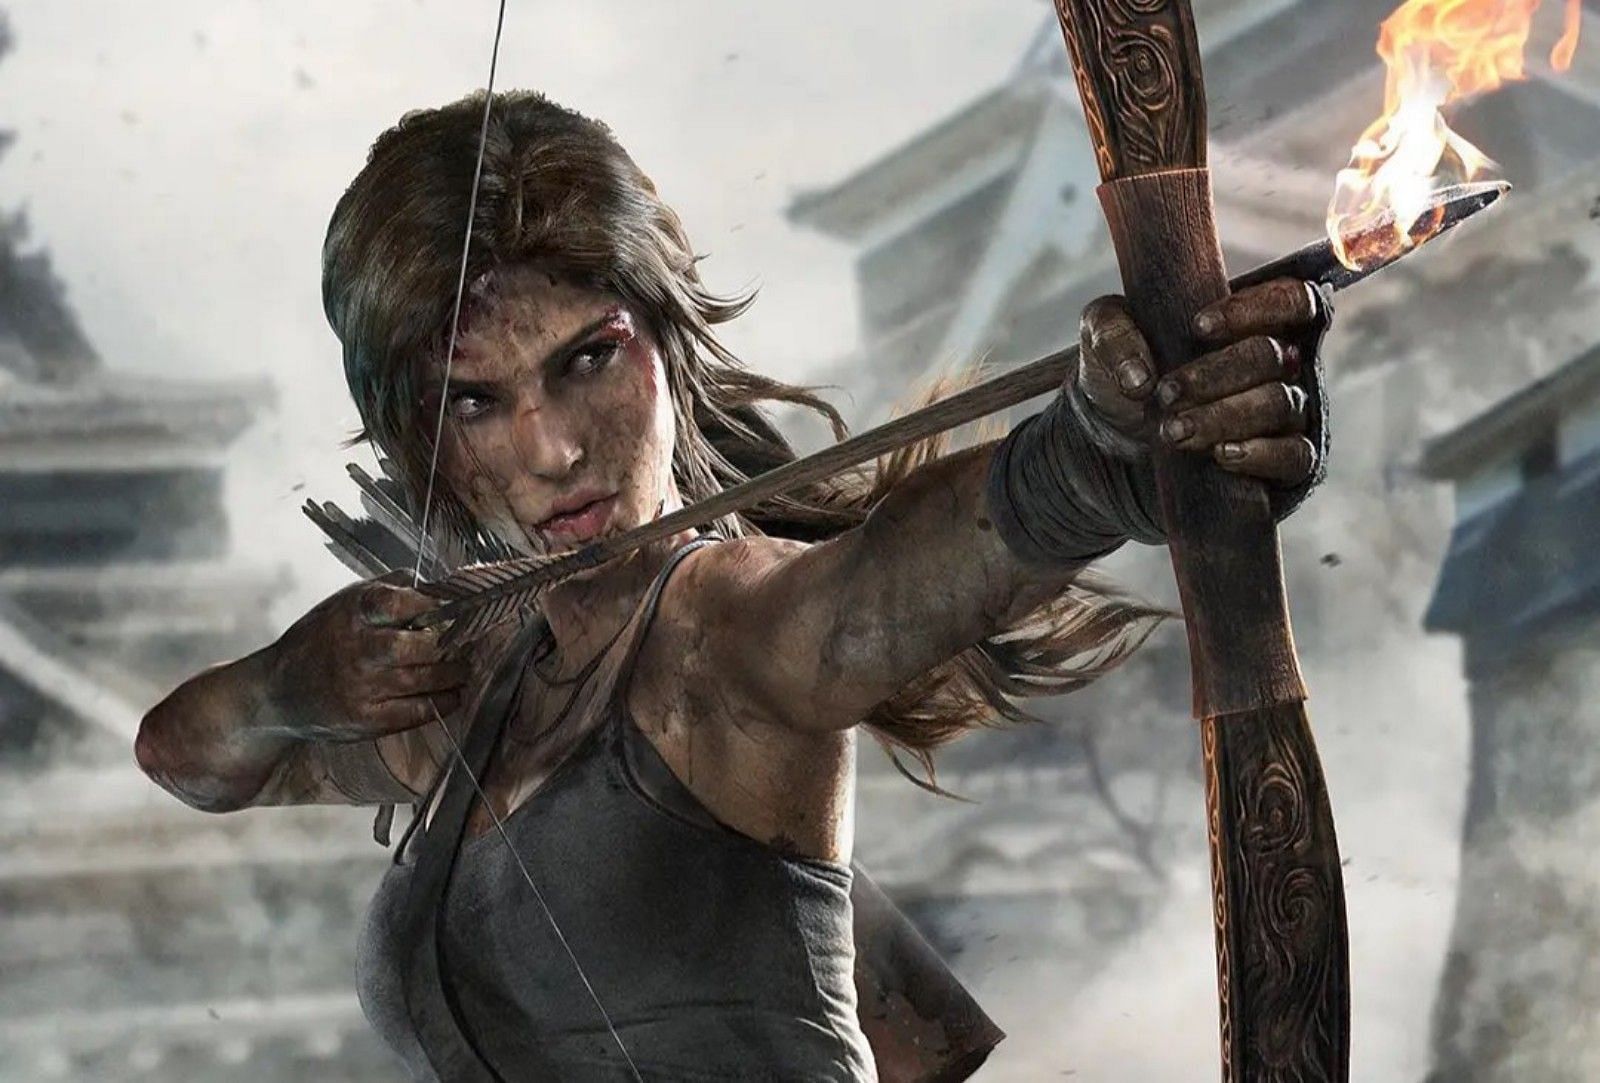 Lara Croft/Tomb Raider as seen in the 2013 Crystal Dynamics game (Image via @thegameawards on X)